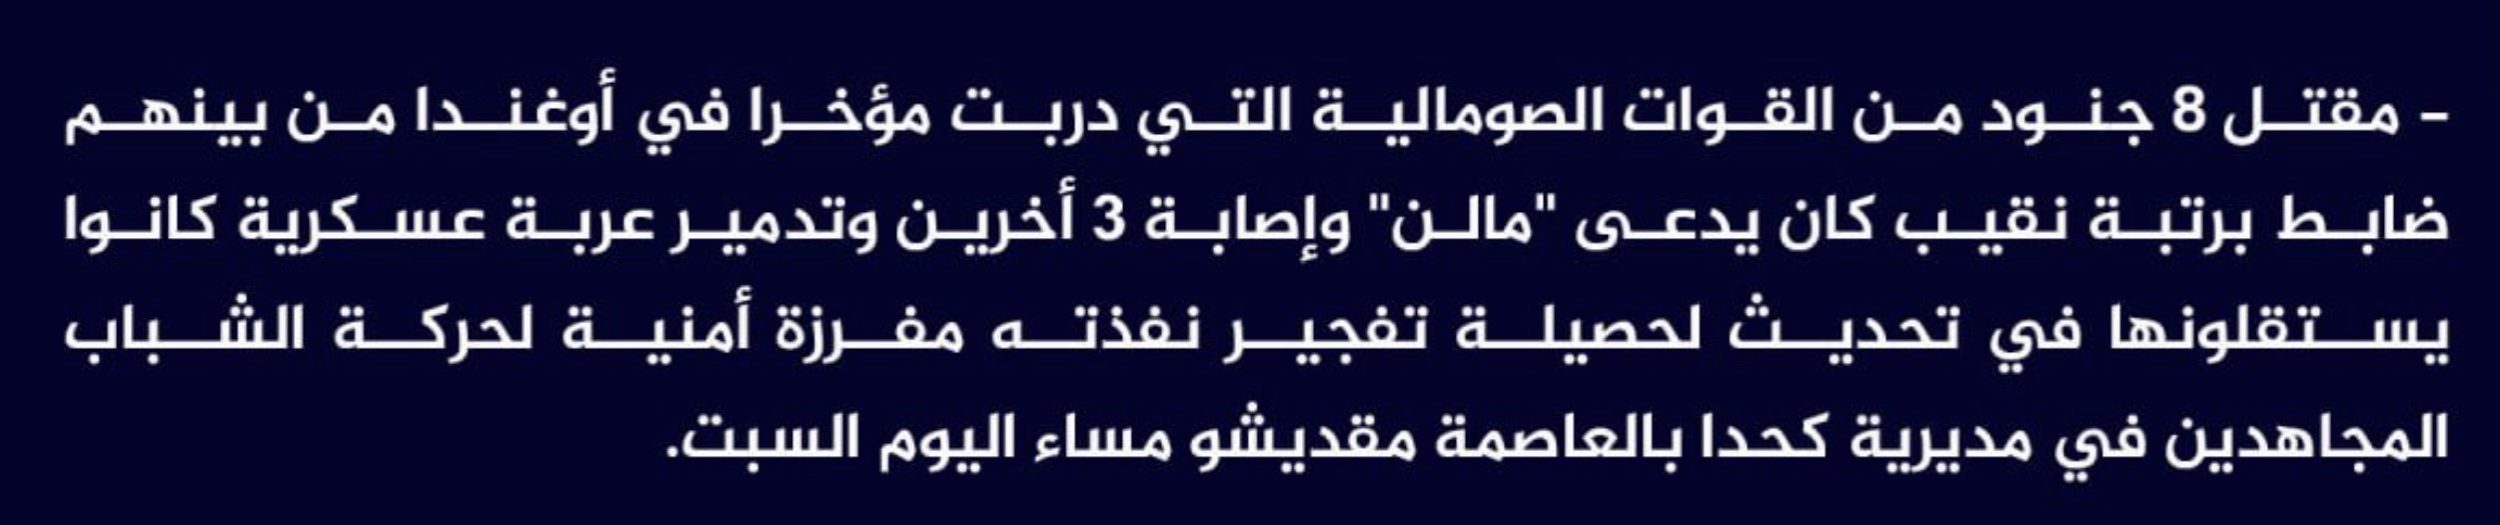 (Claim) al-Shabaab Killed Eight Somalian Forces, Including a Captain Named Malen, Injured Three Others and Destroyed Their Military Vehicle in an IED Attack in Kahda, Mogadishu, Somalia - 14 May 2023